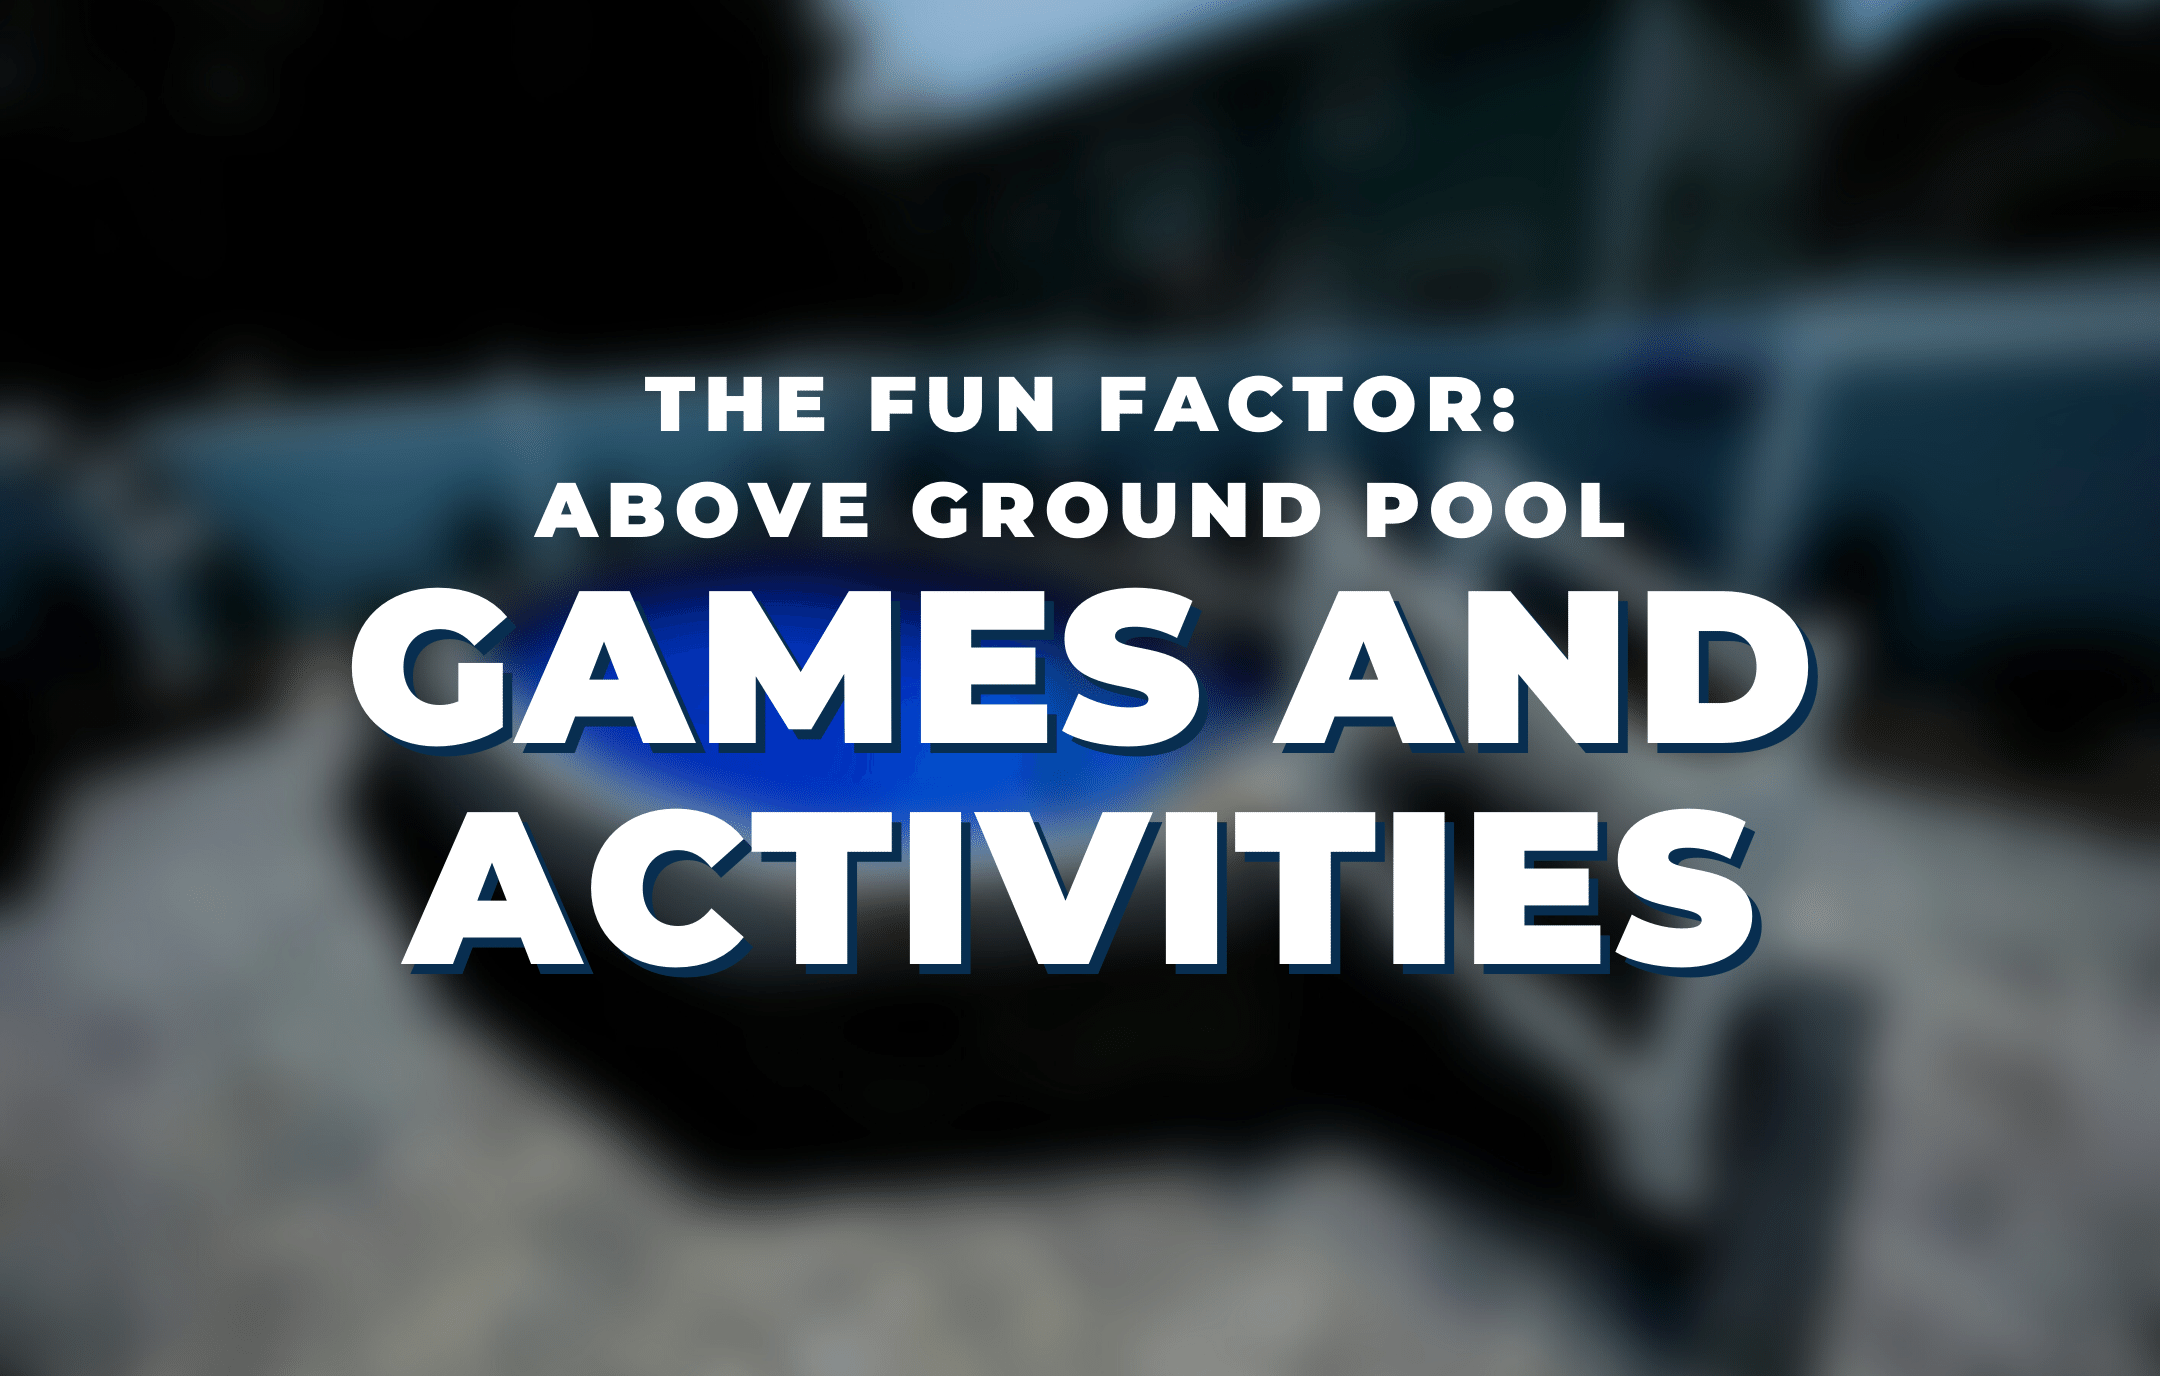 the-fun-factor-above-ground-pool-games-activities.png__PID:2c3b97a5-4744-4485-a7db-dbebde75cec4